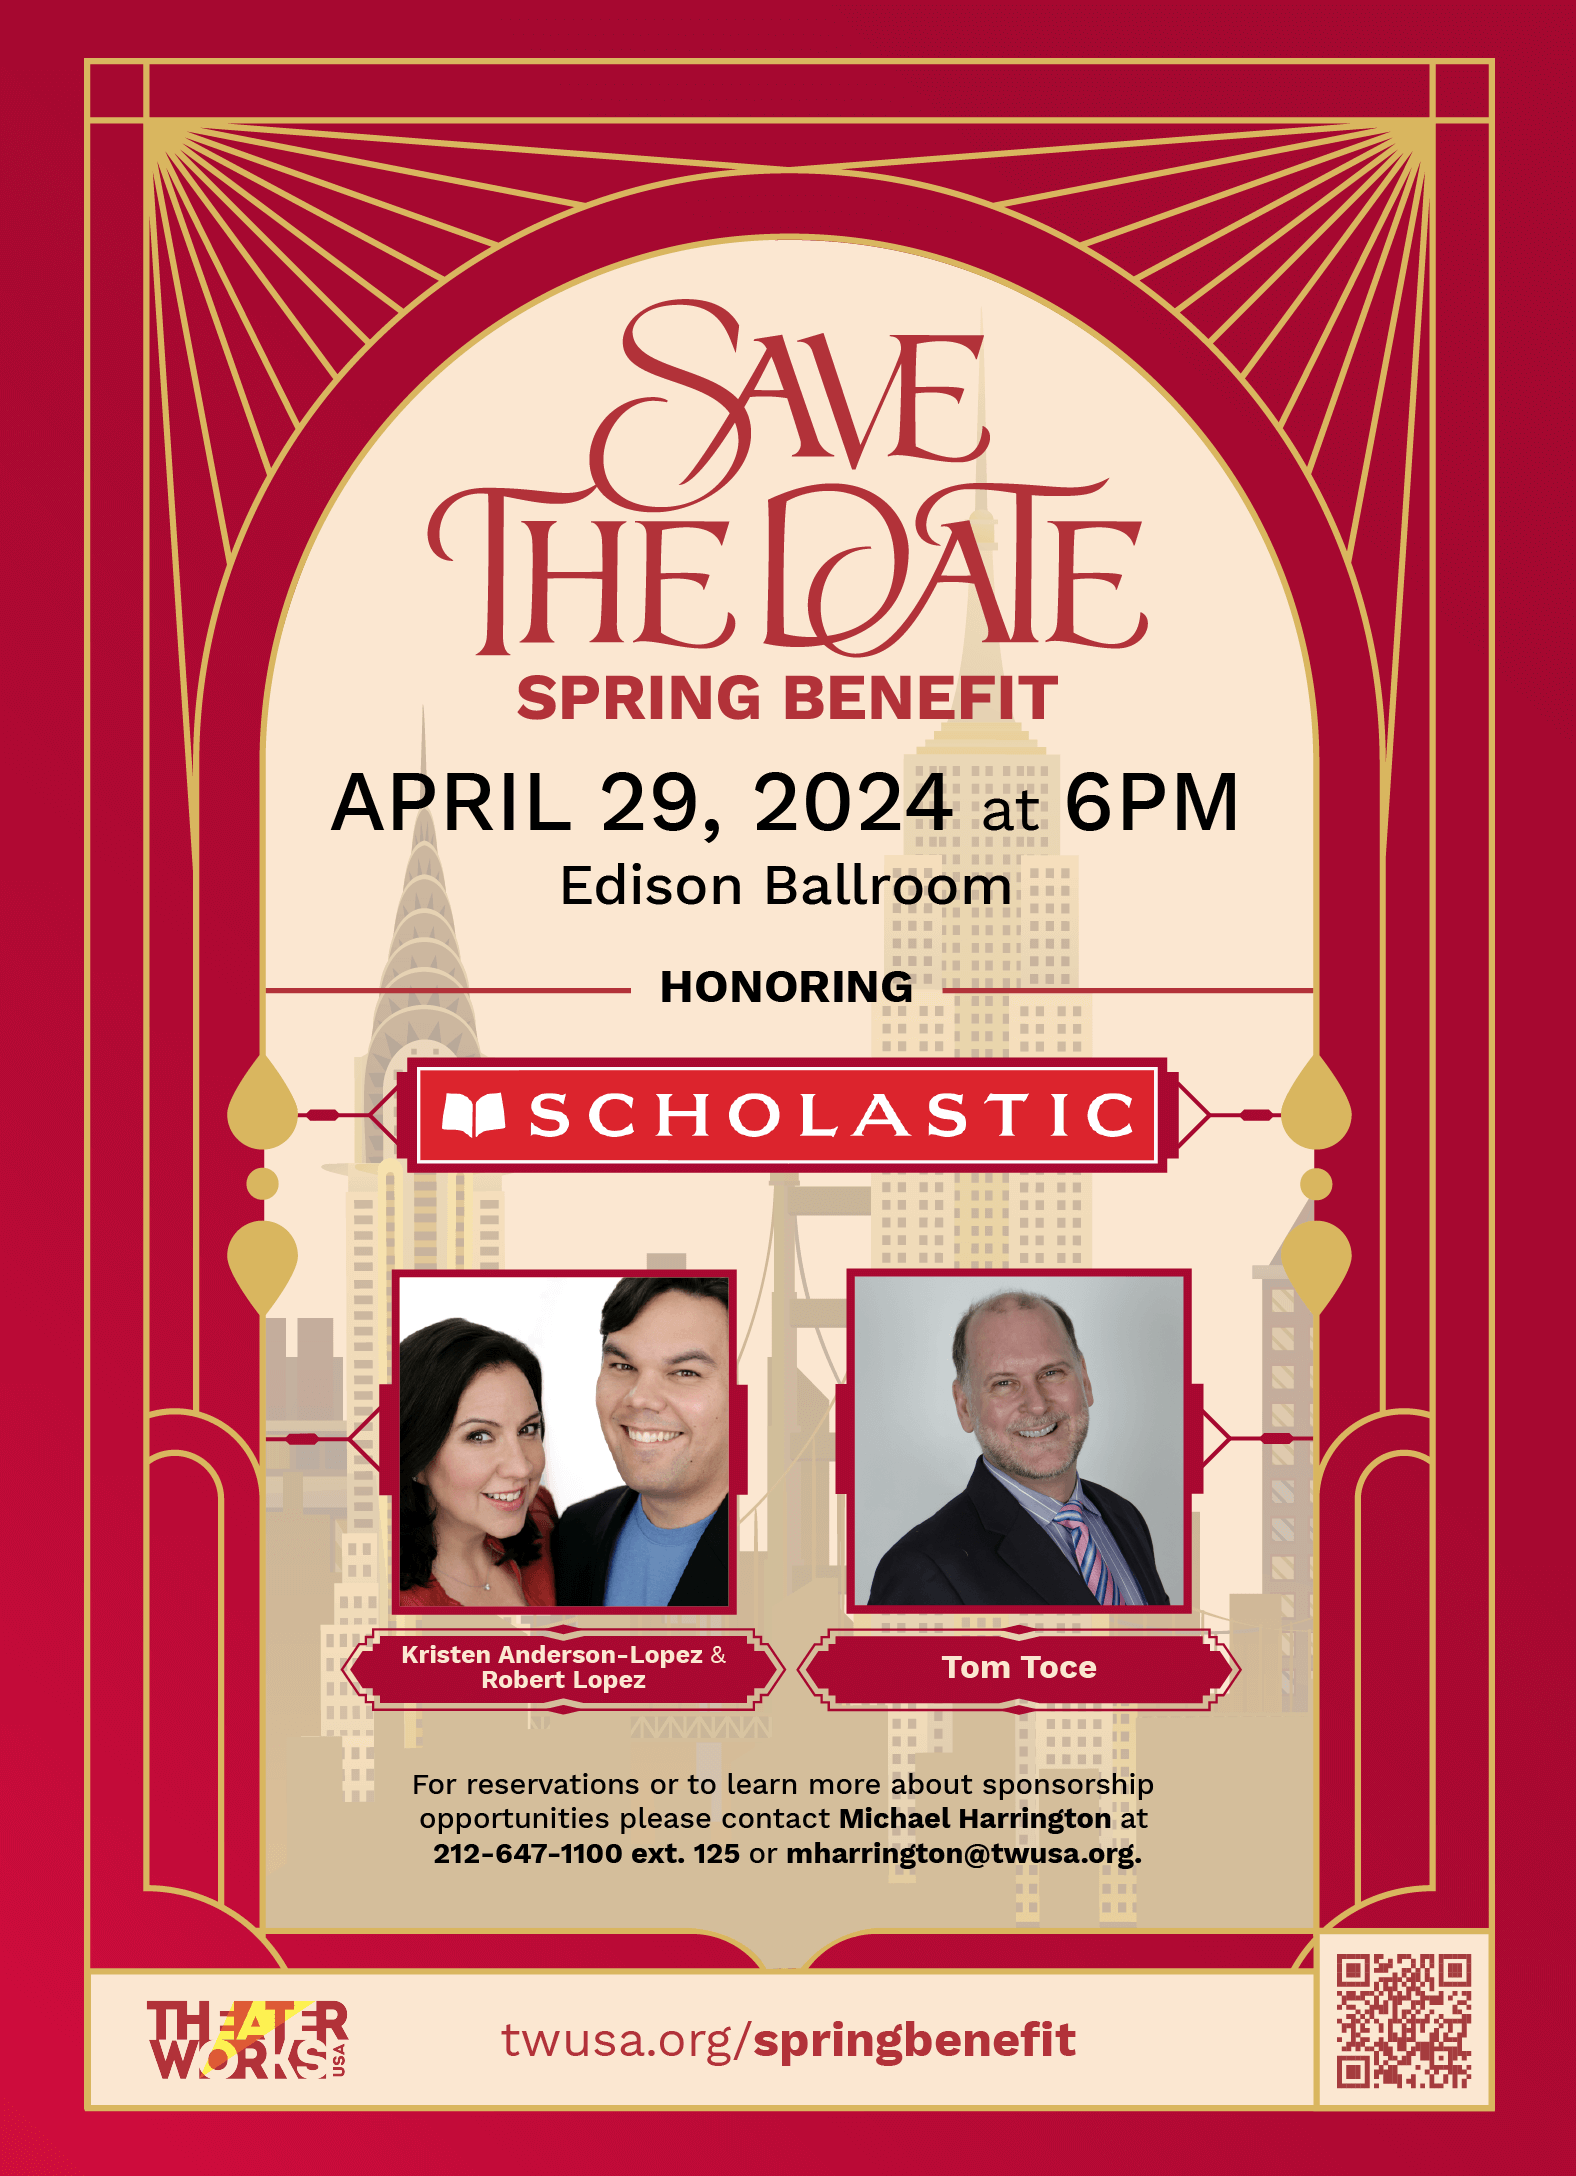 Save the Date TheaterWorksUSA Spring Benefit April 29, 2024 at 6PM at the Edison Ballroom. Honoring Scholastic Inc., Kristen Anderson-Lopez & Robert Lopez, and Tom Toce. For reservations or to learn more about sponsorship opportunities please contact Michael Harrington at 212.647.1100 ext. 125 or mharrington@twusa.org